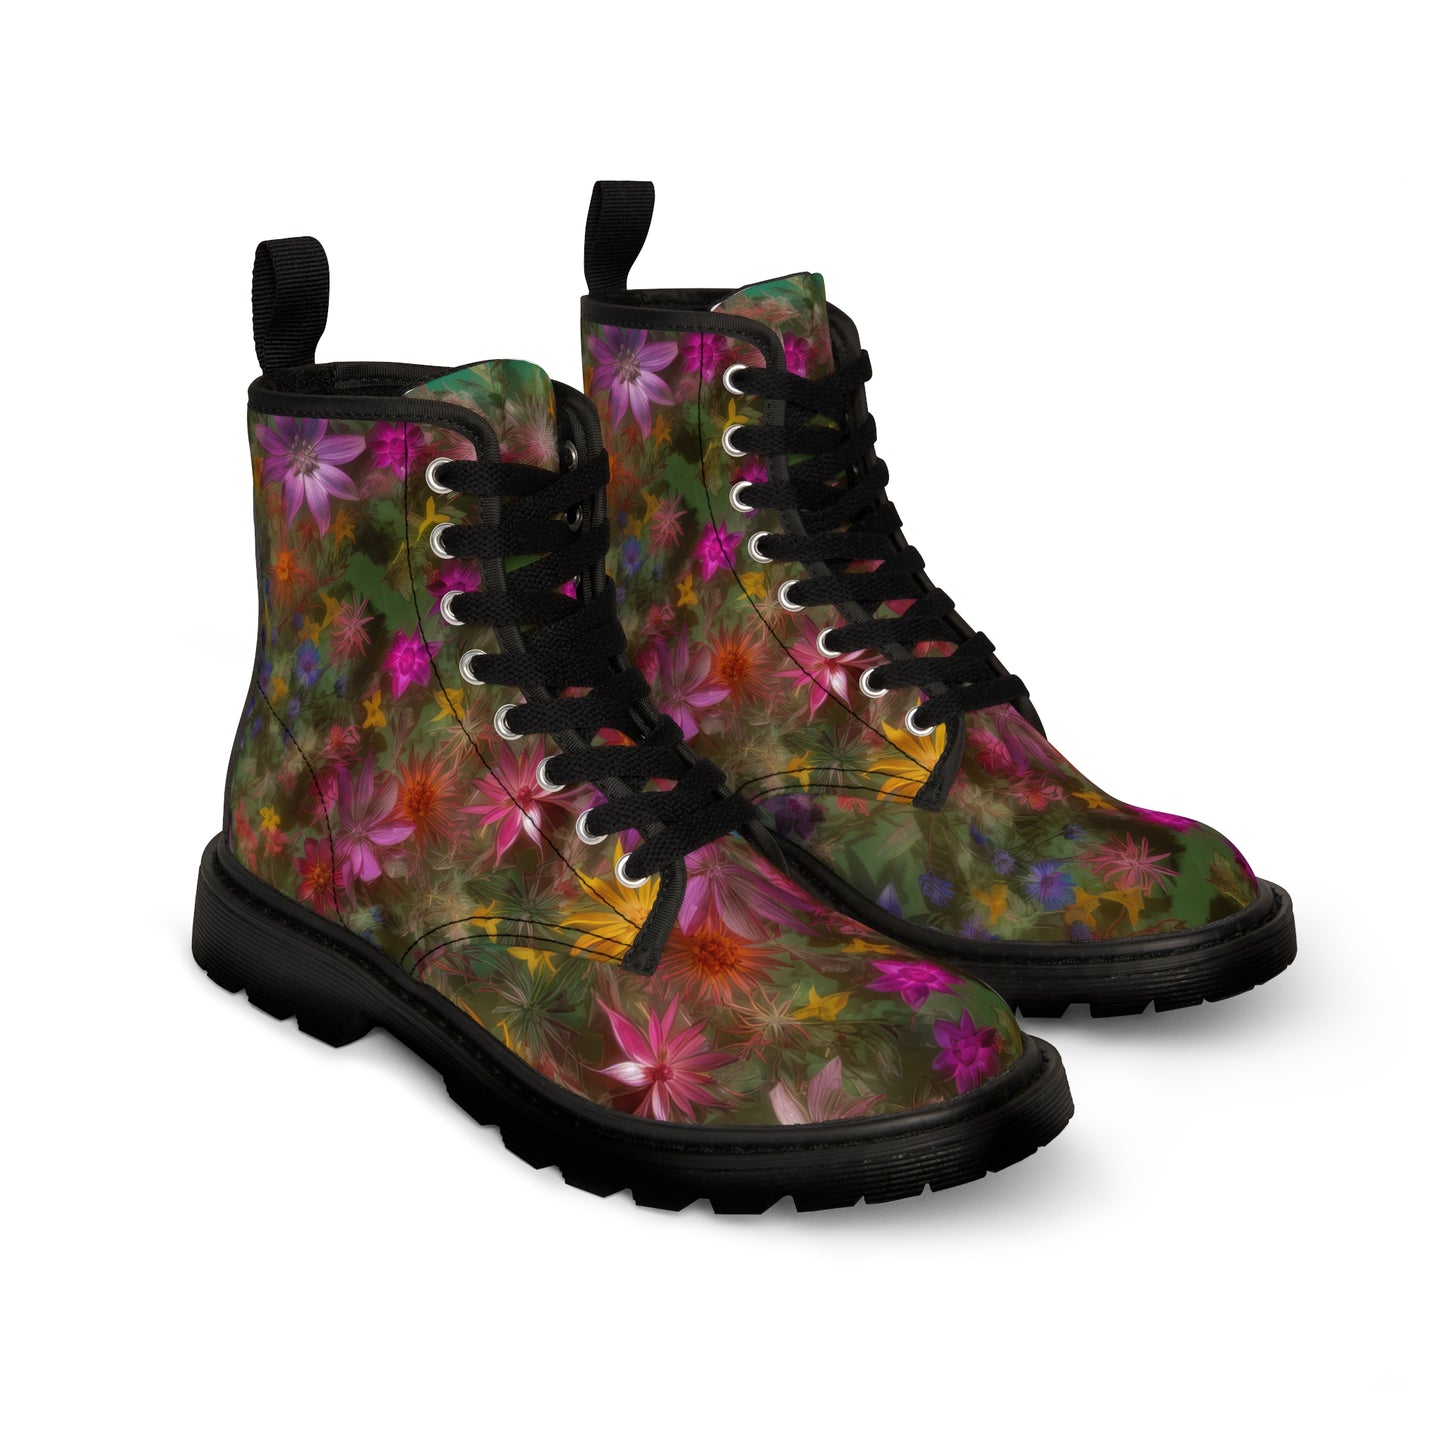 Bold & Beautiful & Metallic Wildflowers, Gorgeous floral Design, Style 3 Women's Canvas Boots